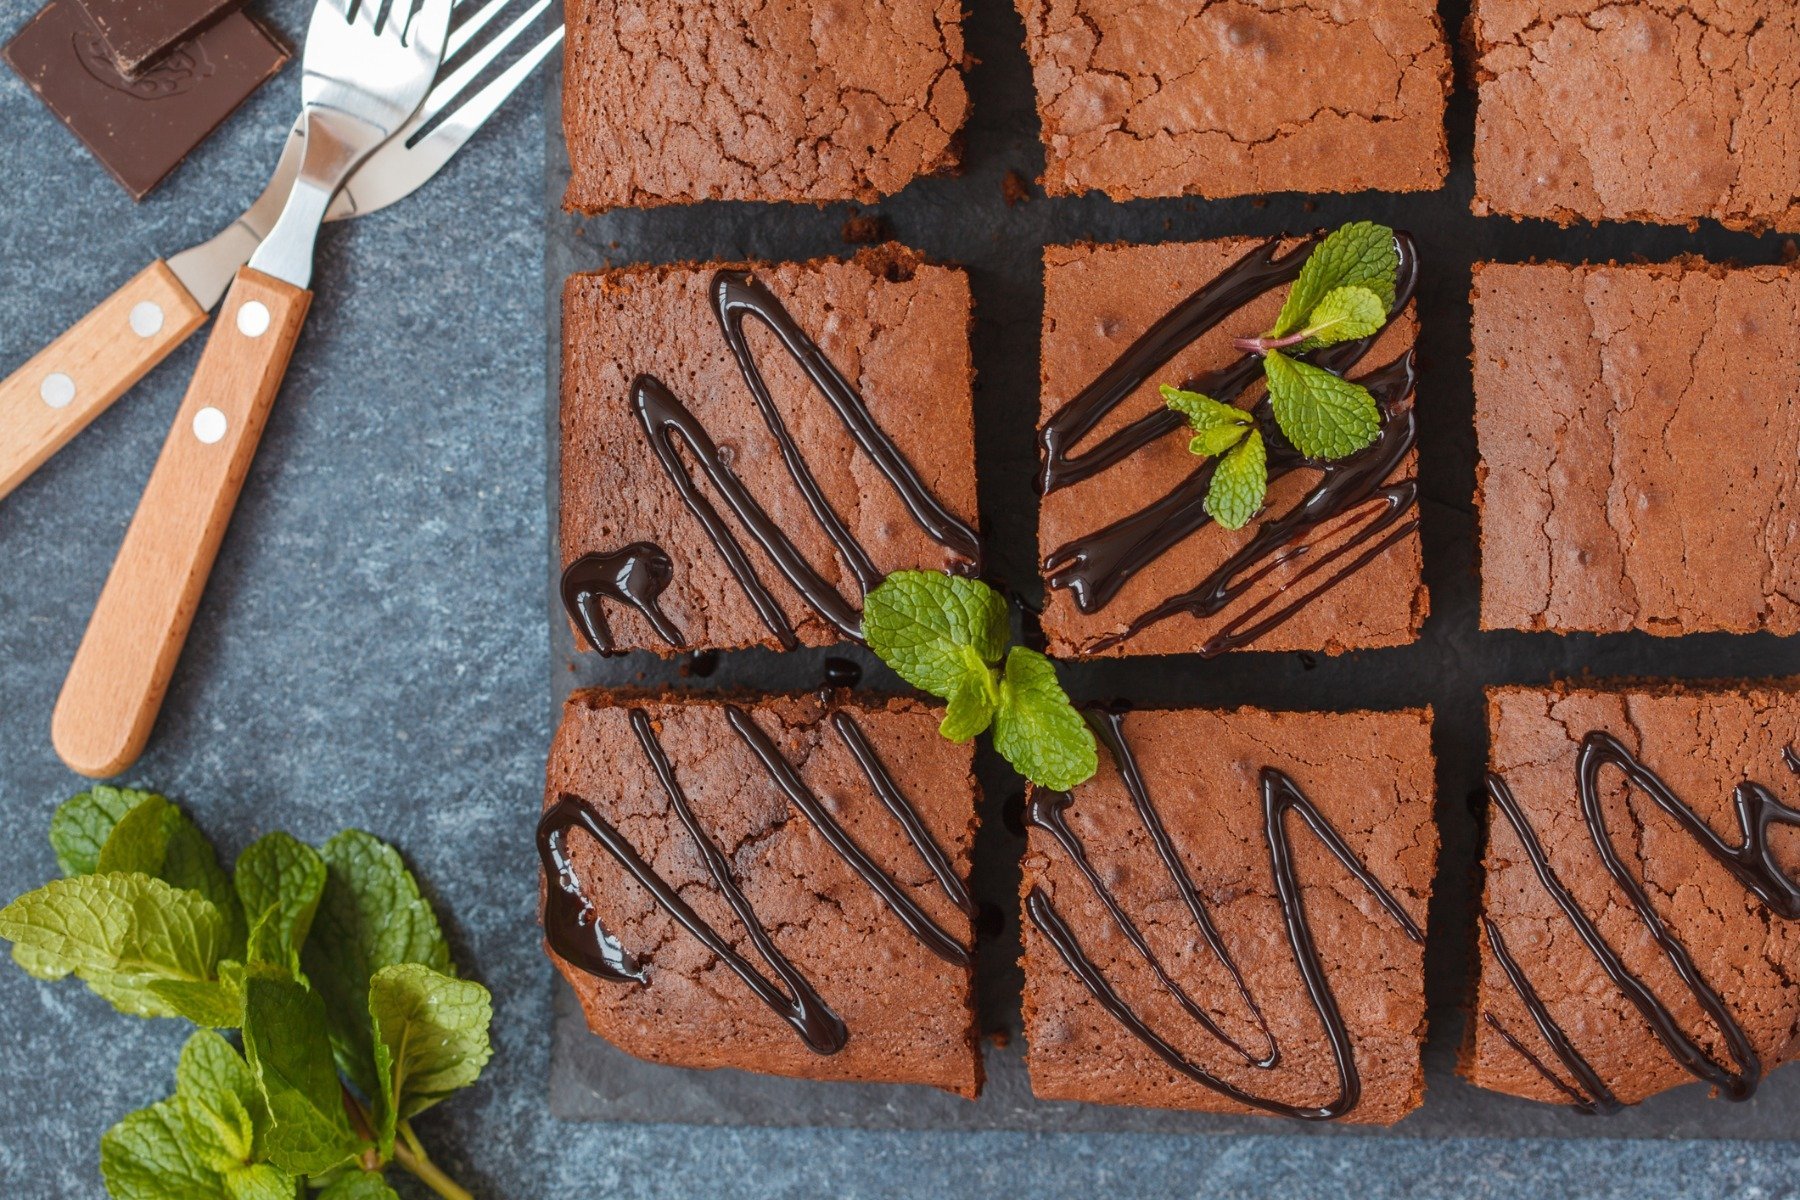 5 great recipes for chocolate brownies for athletes